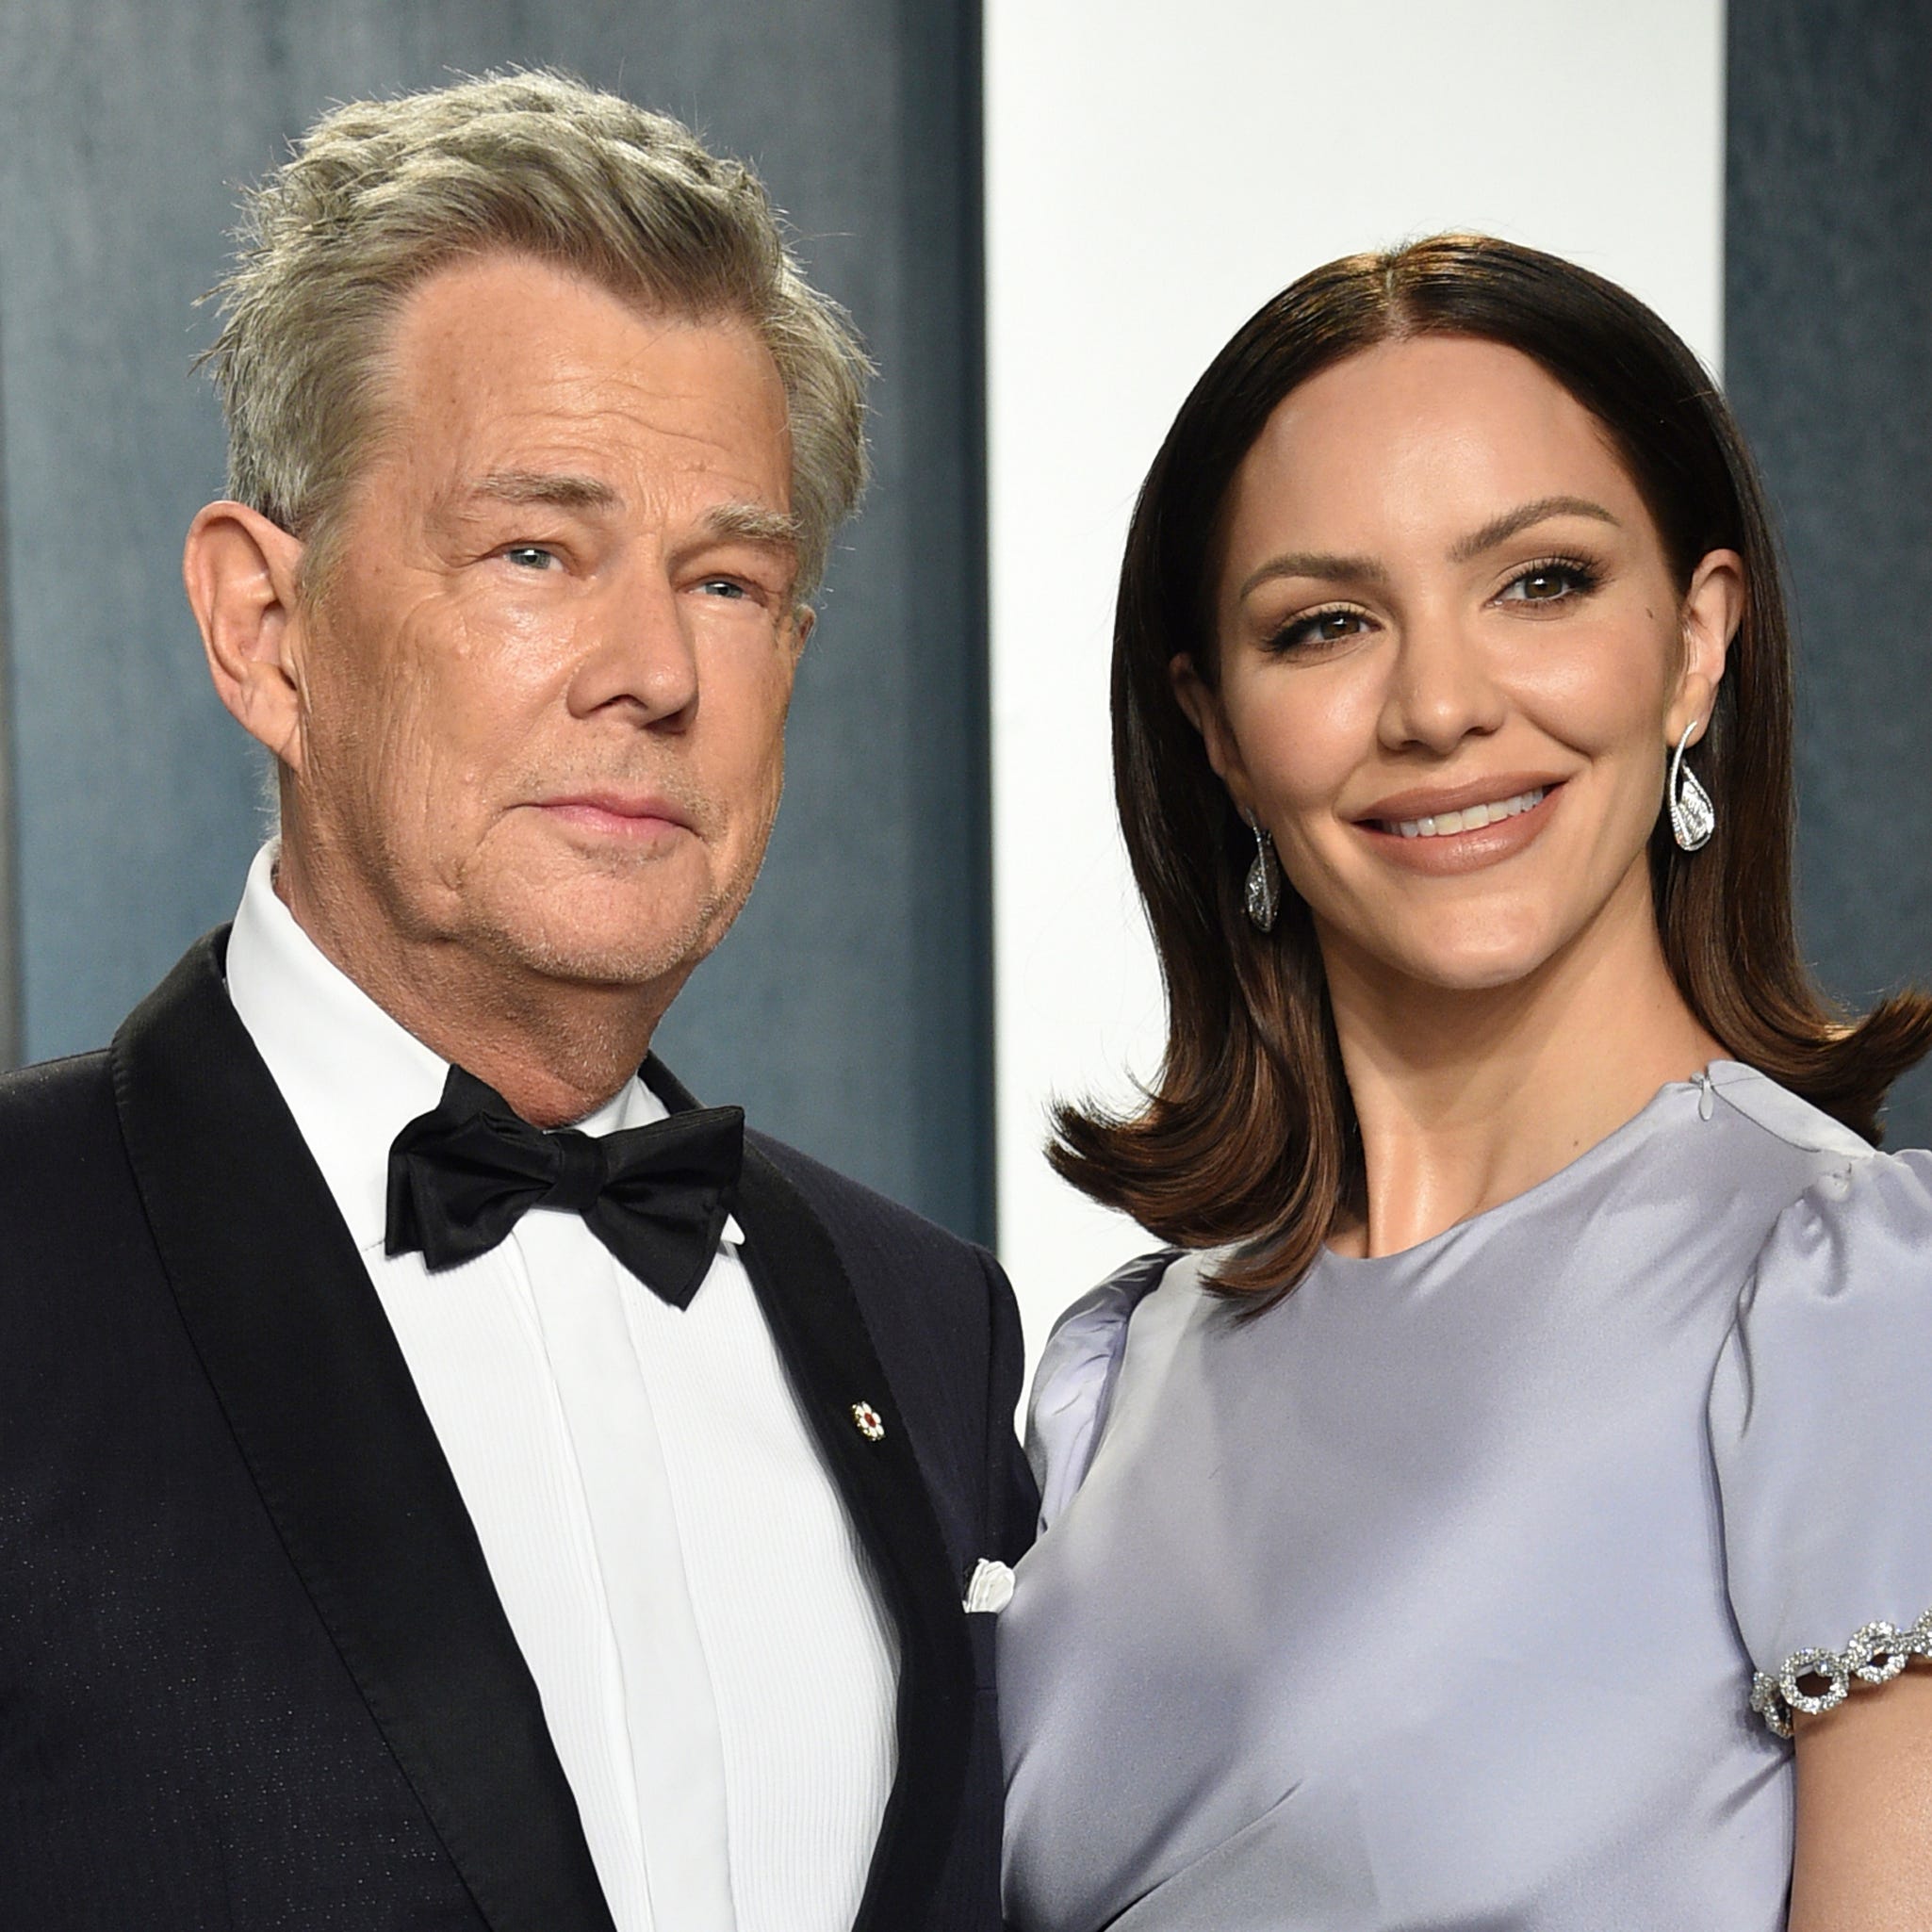 FILE - David Foster, left, and Katharine McPhee arrive at the Vanity Fair Oscar Party on Feb. 9, 2020, in Beverly Hills, Calif. The couple, who wed in 2019, have welcomed a baby boy, McPhee's publicist confirmed Wednesday, Feb. 24, 2021. (Photo by Evan Agostini/Invision/AP, File) ORG XMIT: CAPM304